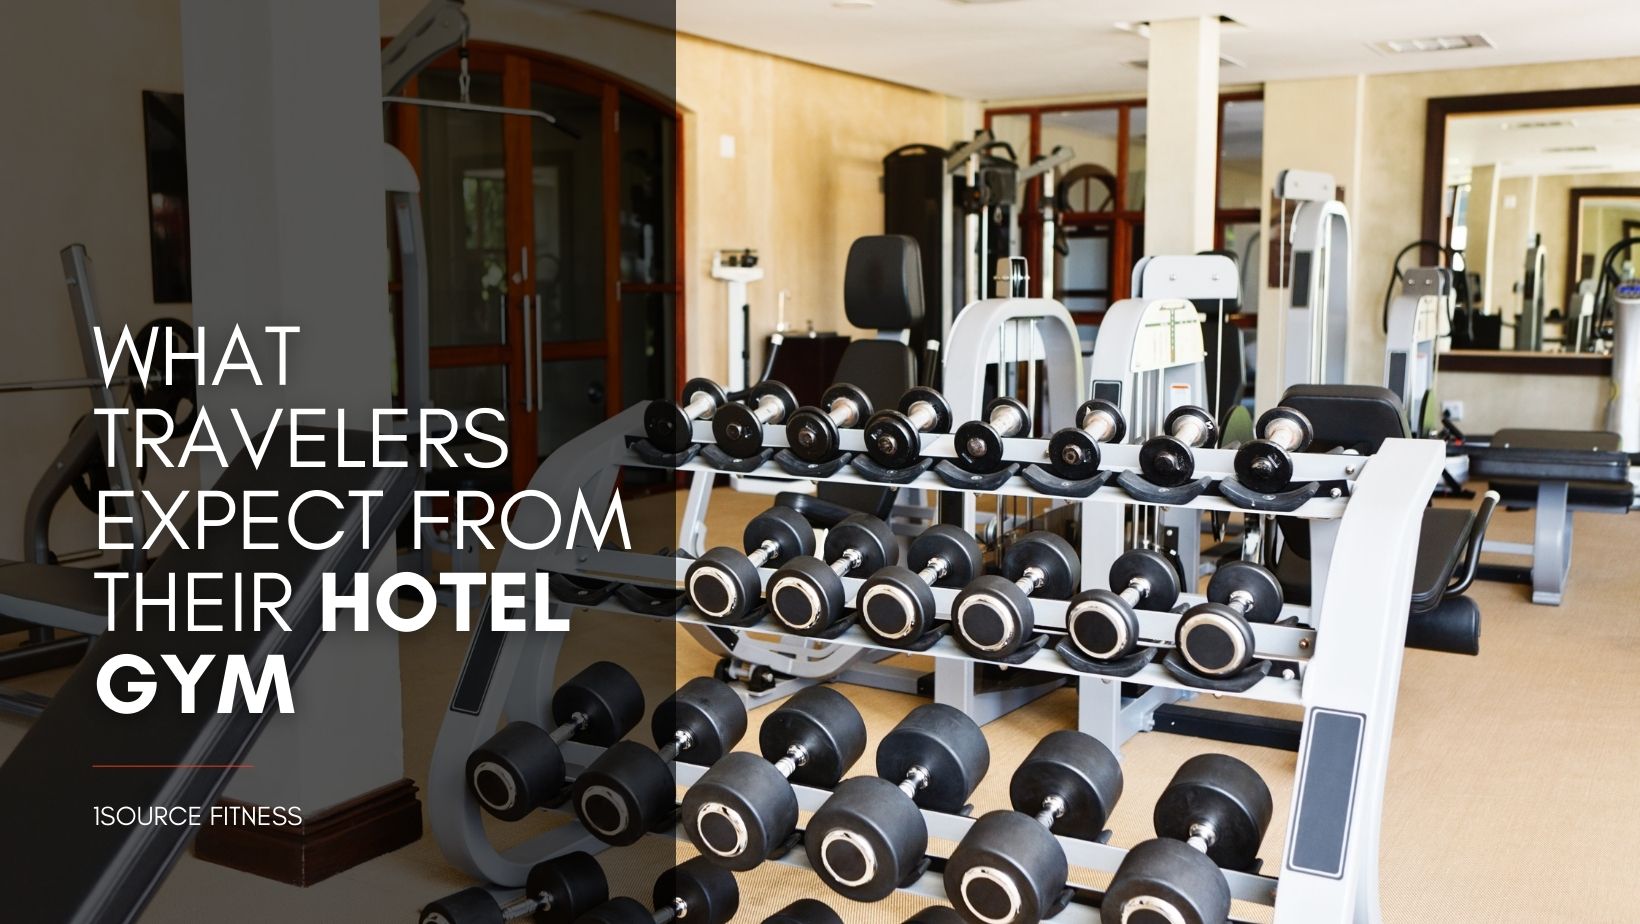 Hotel gym with a weight rack and equipment